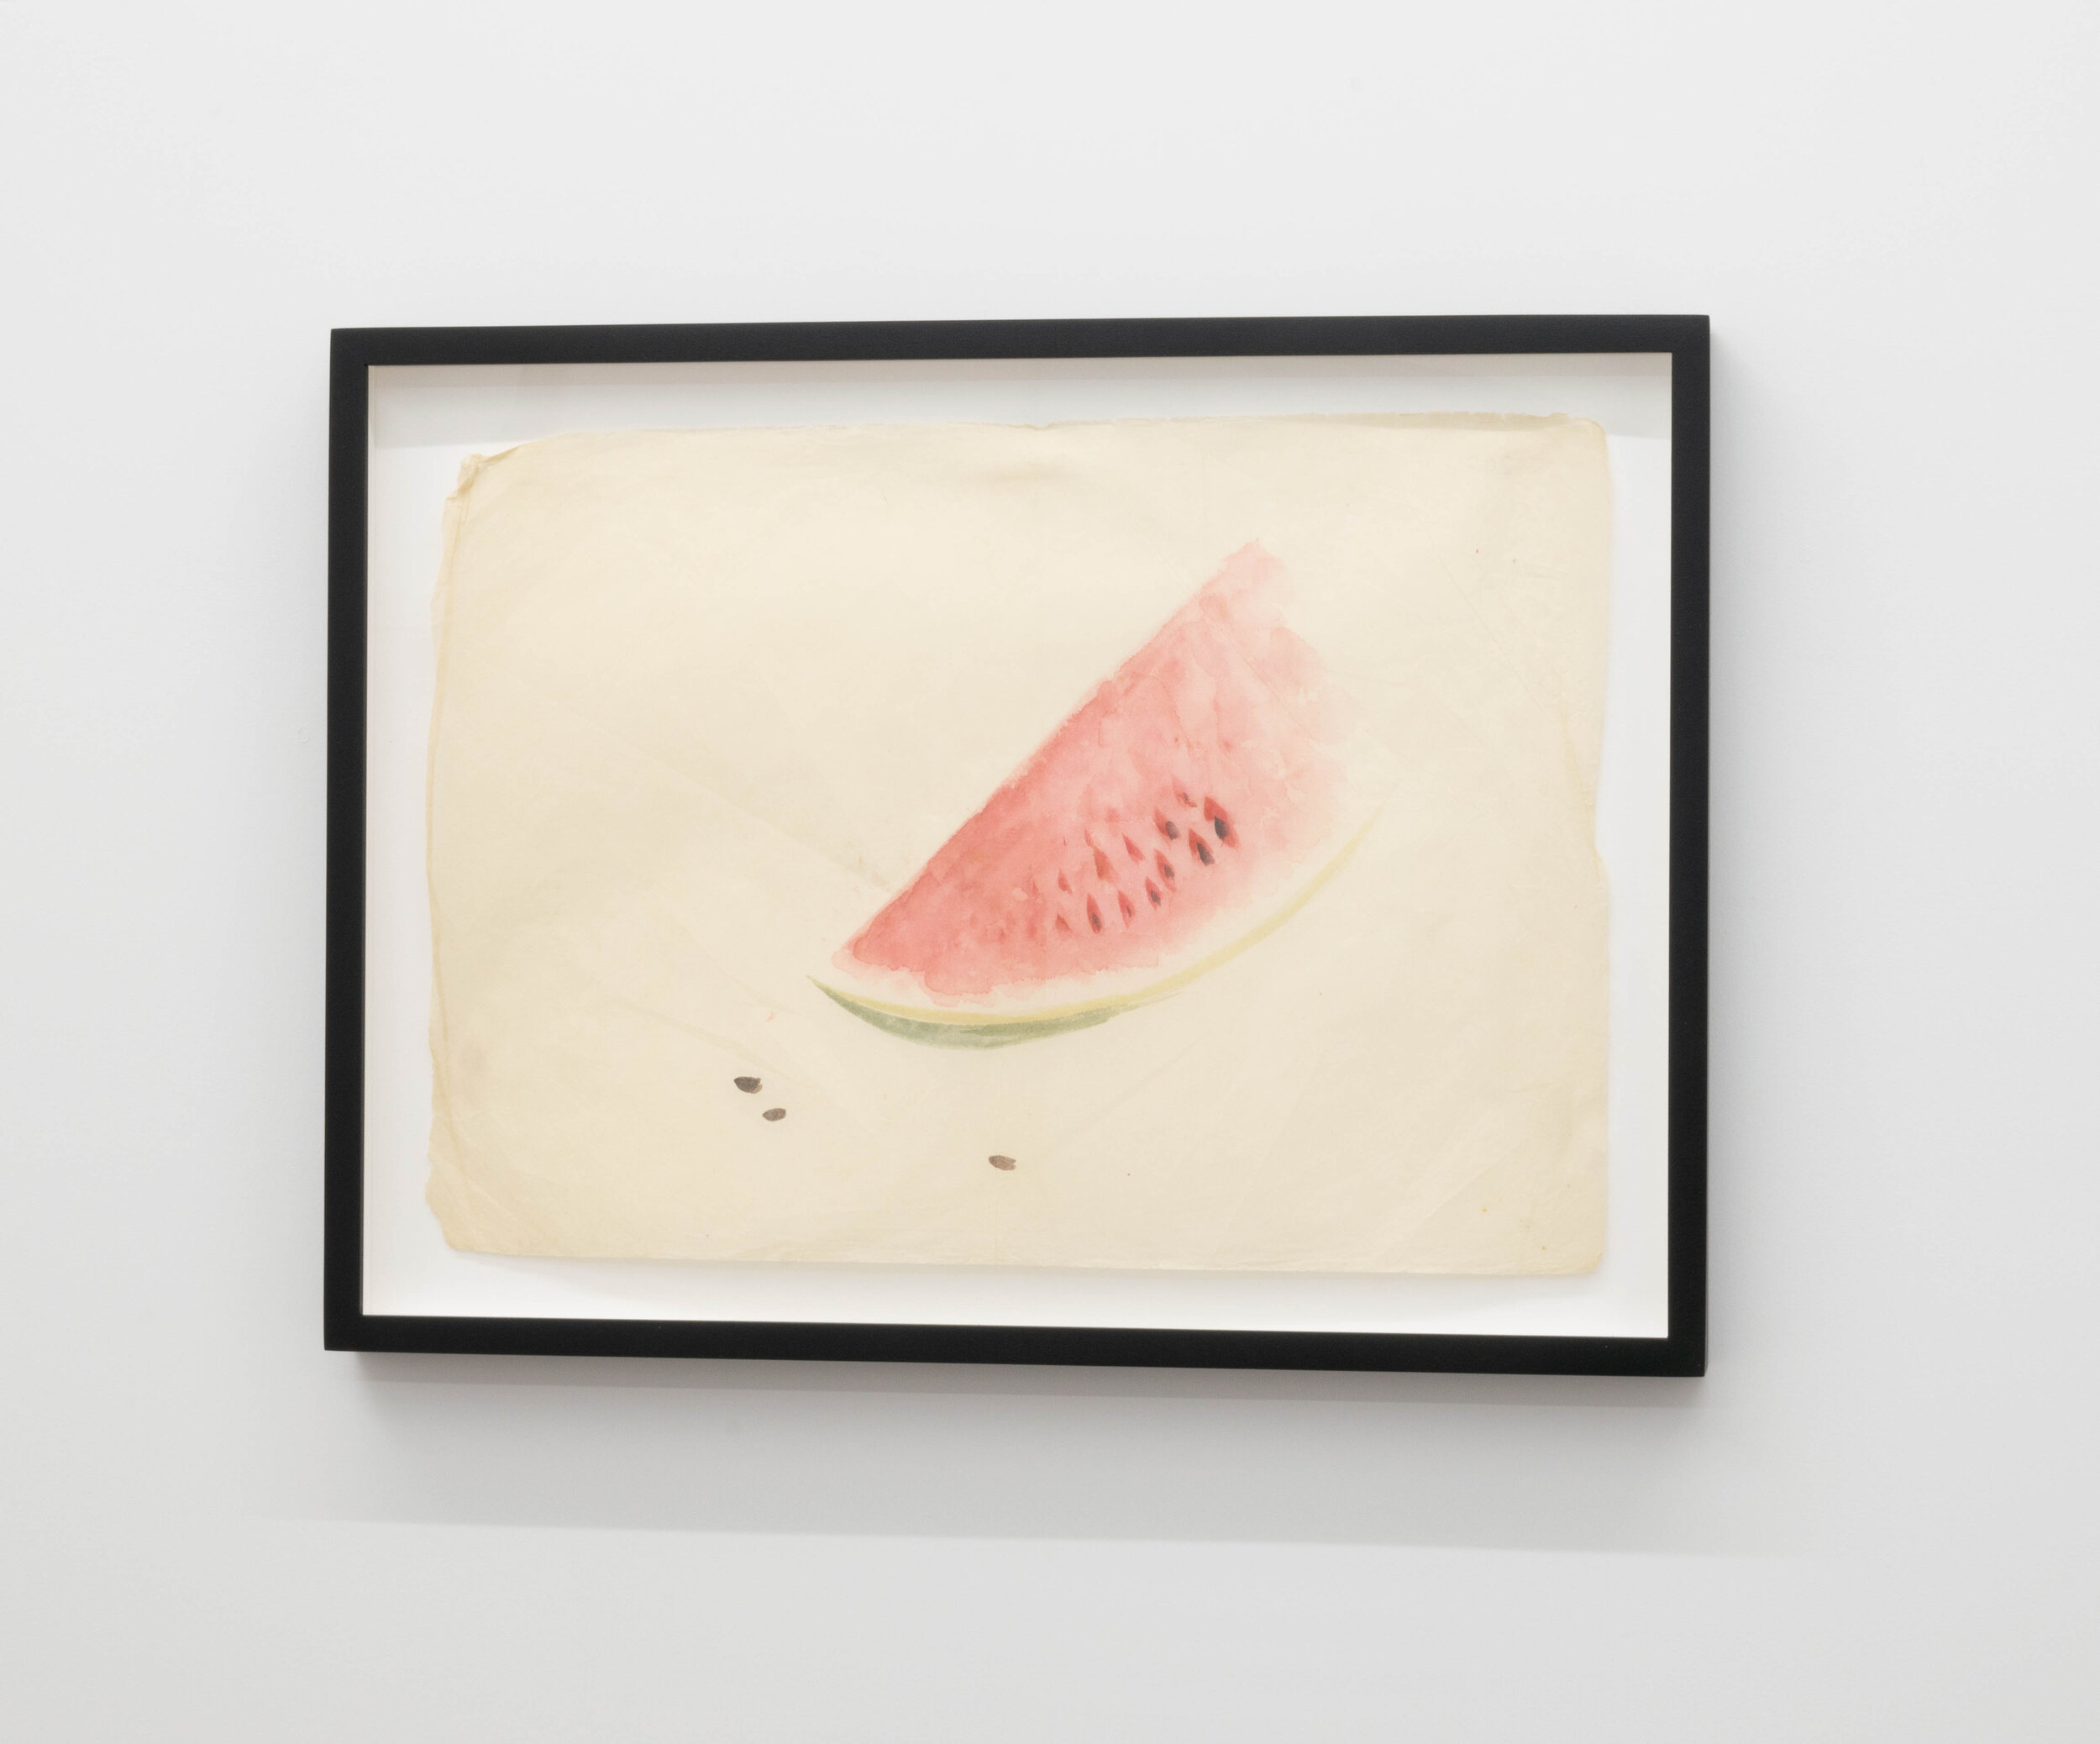 Untitled (Watermelon), 2019, anonymous early 20th Century Japanese watercolor on rice paper, 13.5 x18 inches (framed) 